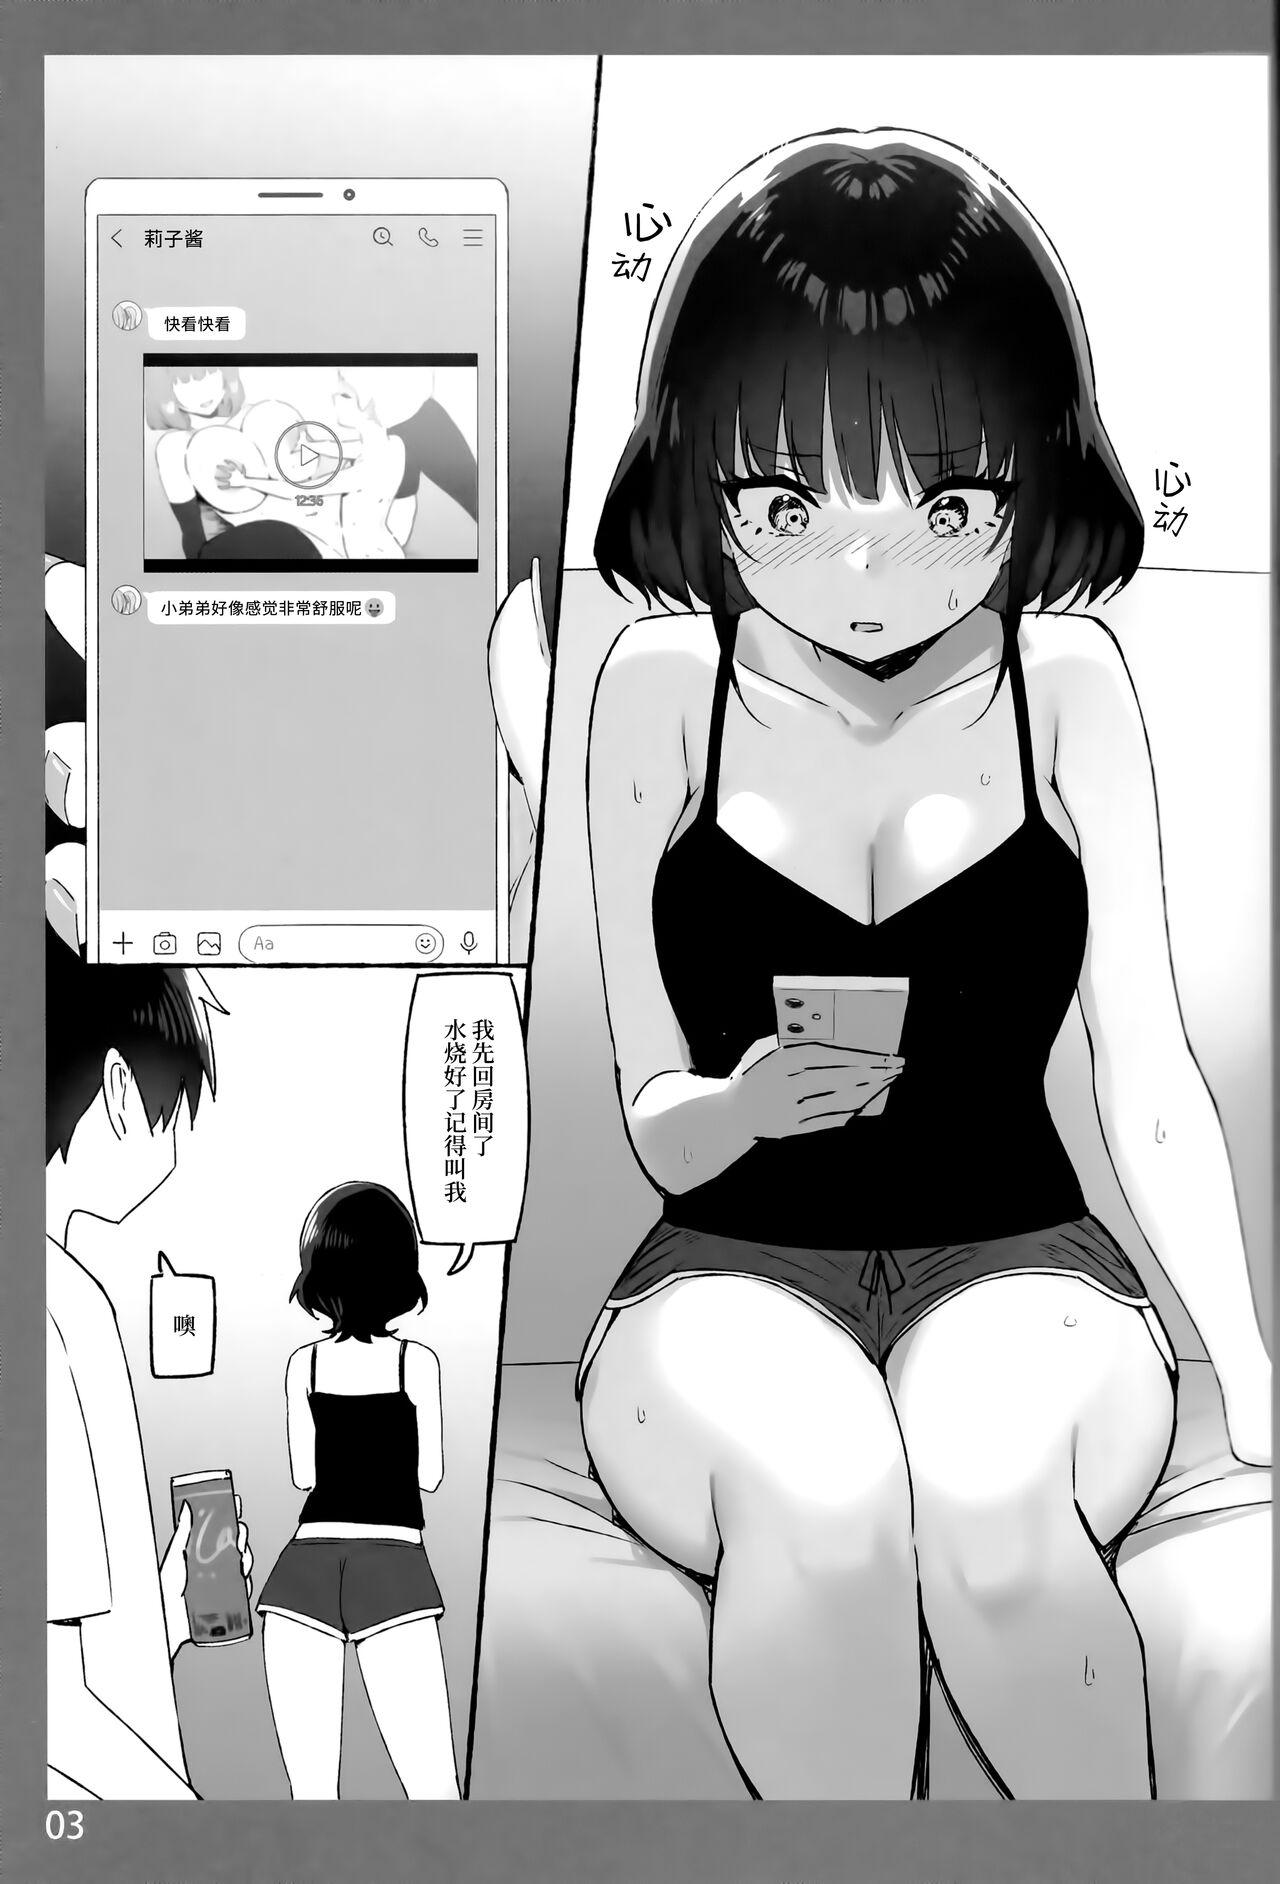 Tight Cunt [Candy Club (Sky)] Onee-chan to Torokeru Kimochi SP | The Melting Feeling with Onee-chan SP [Chinese] [白杨汉化组] - Original Highheels - Page 2